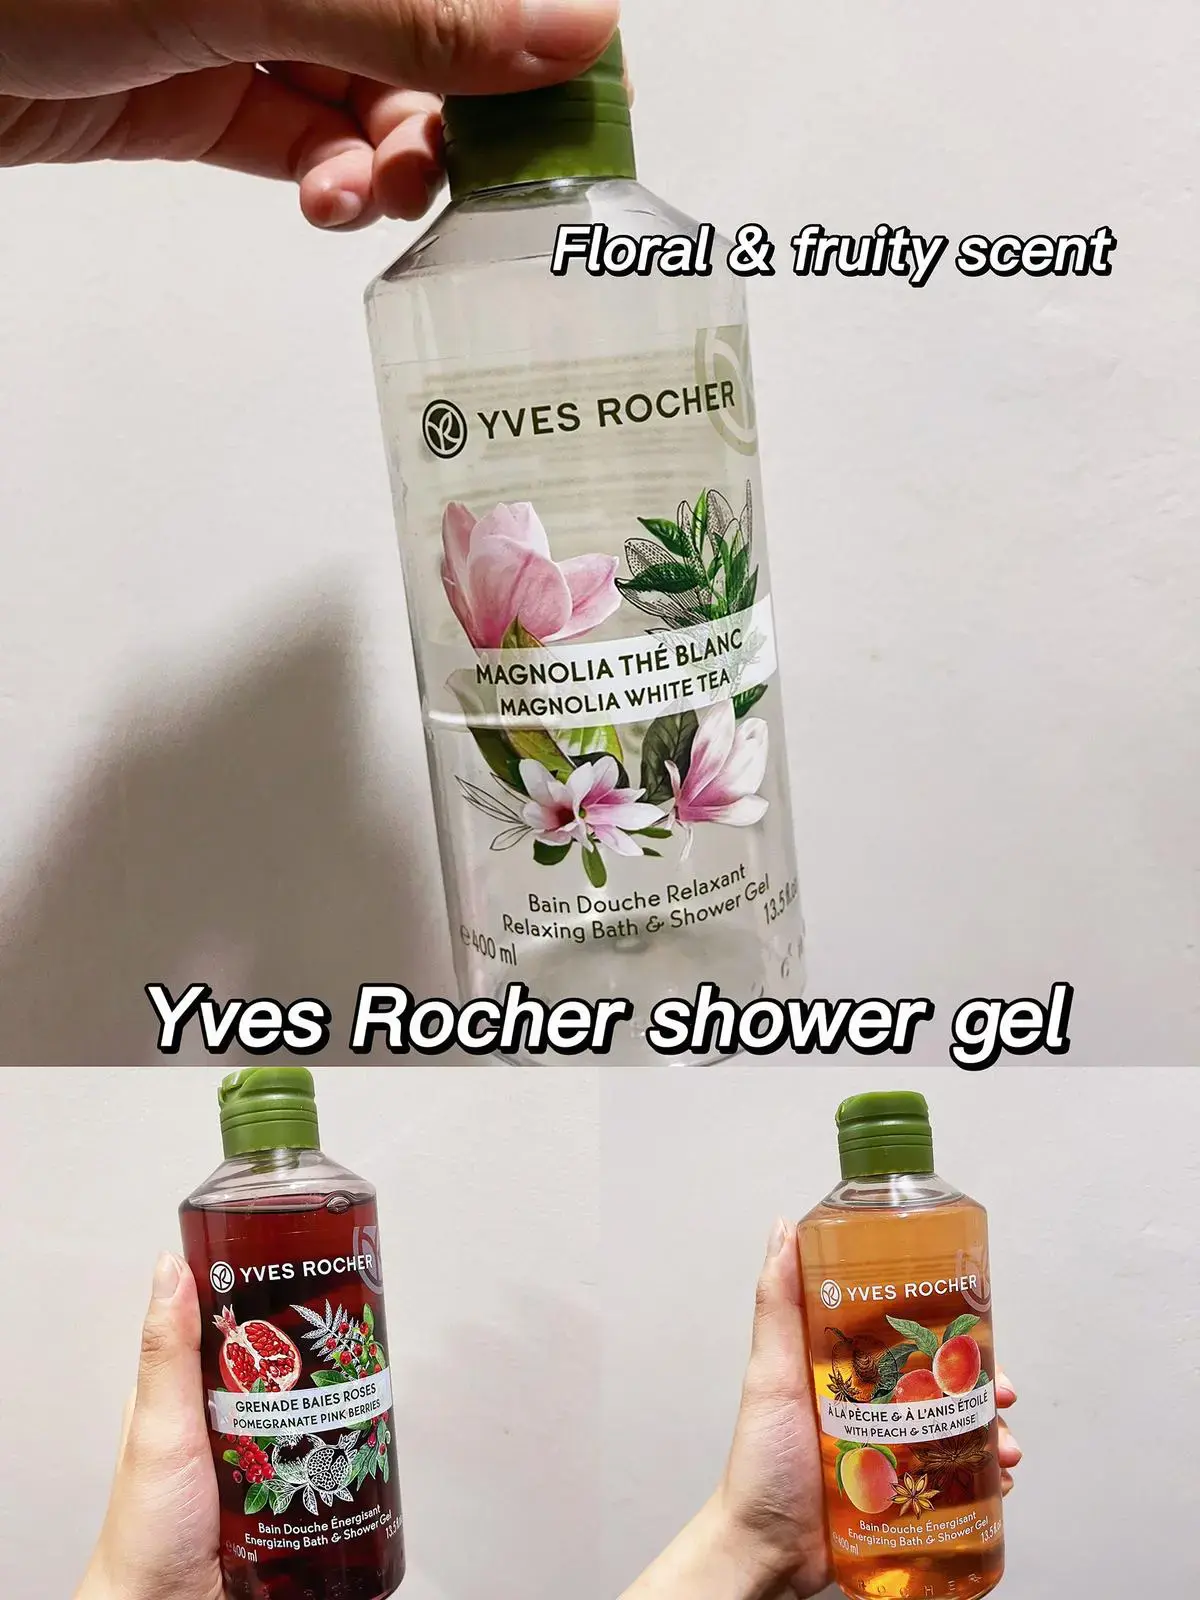 Taking a hawt shower with Peach